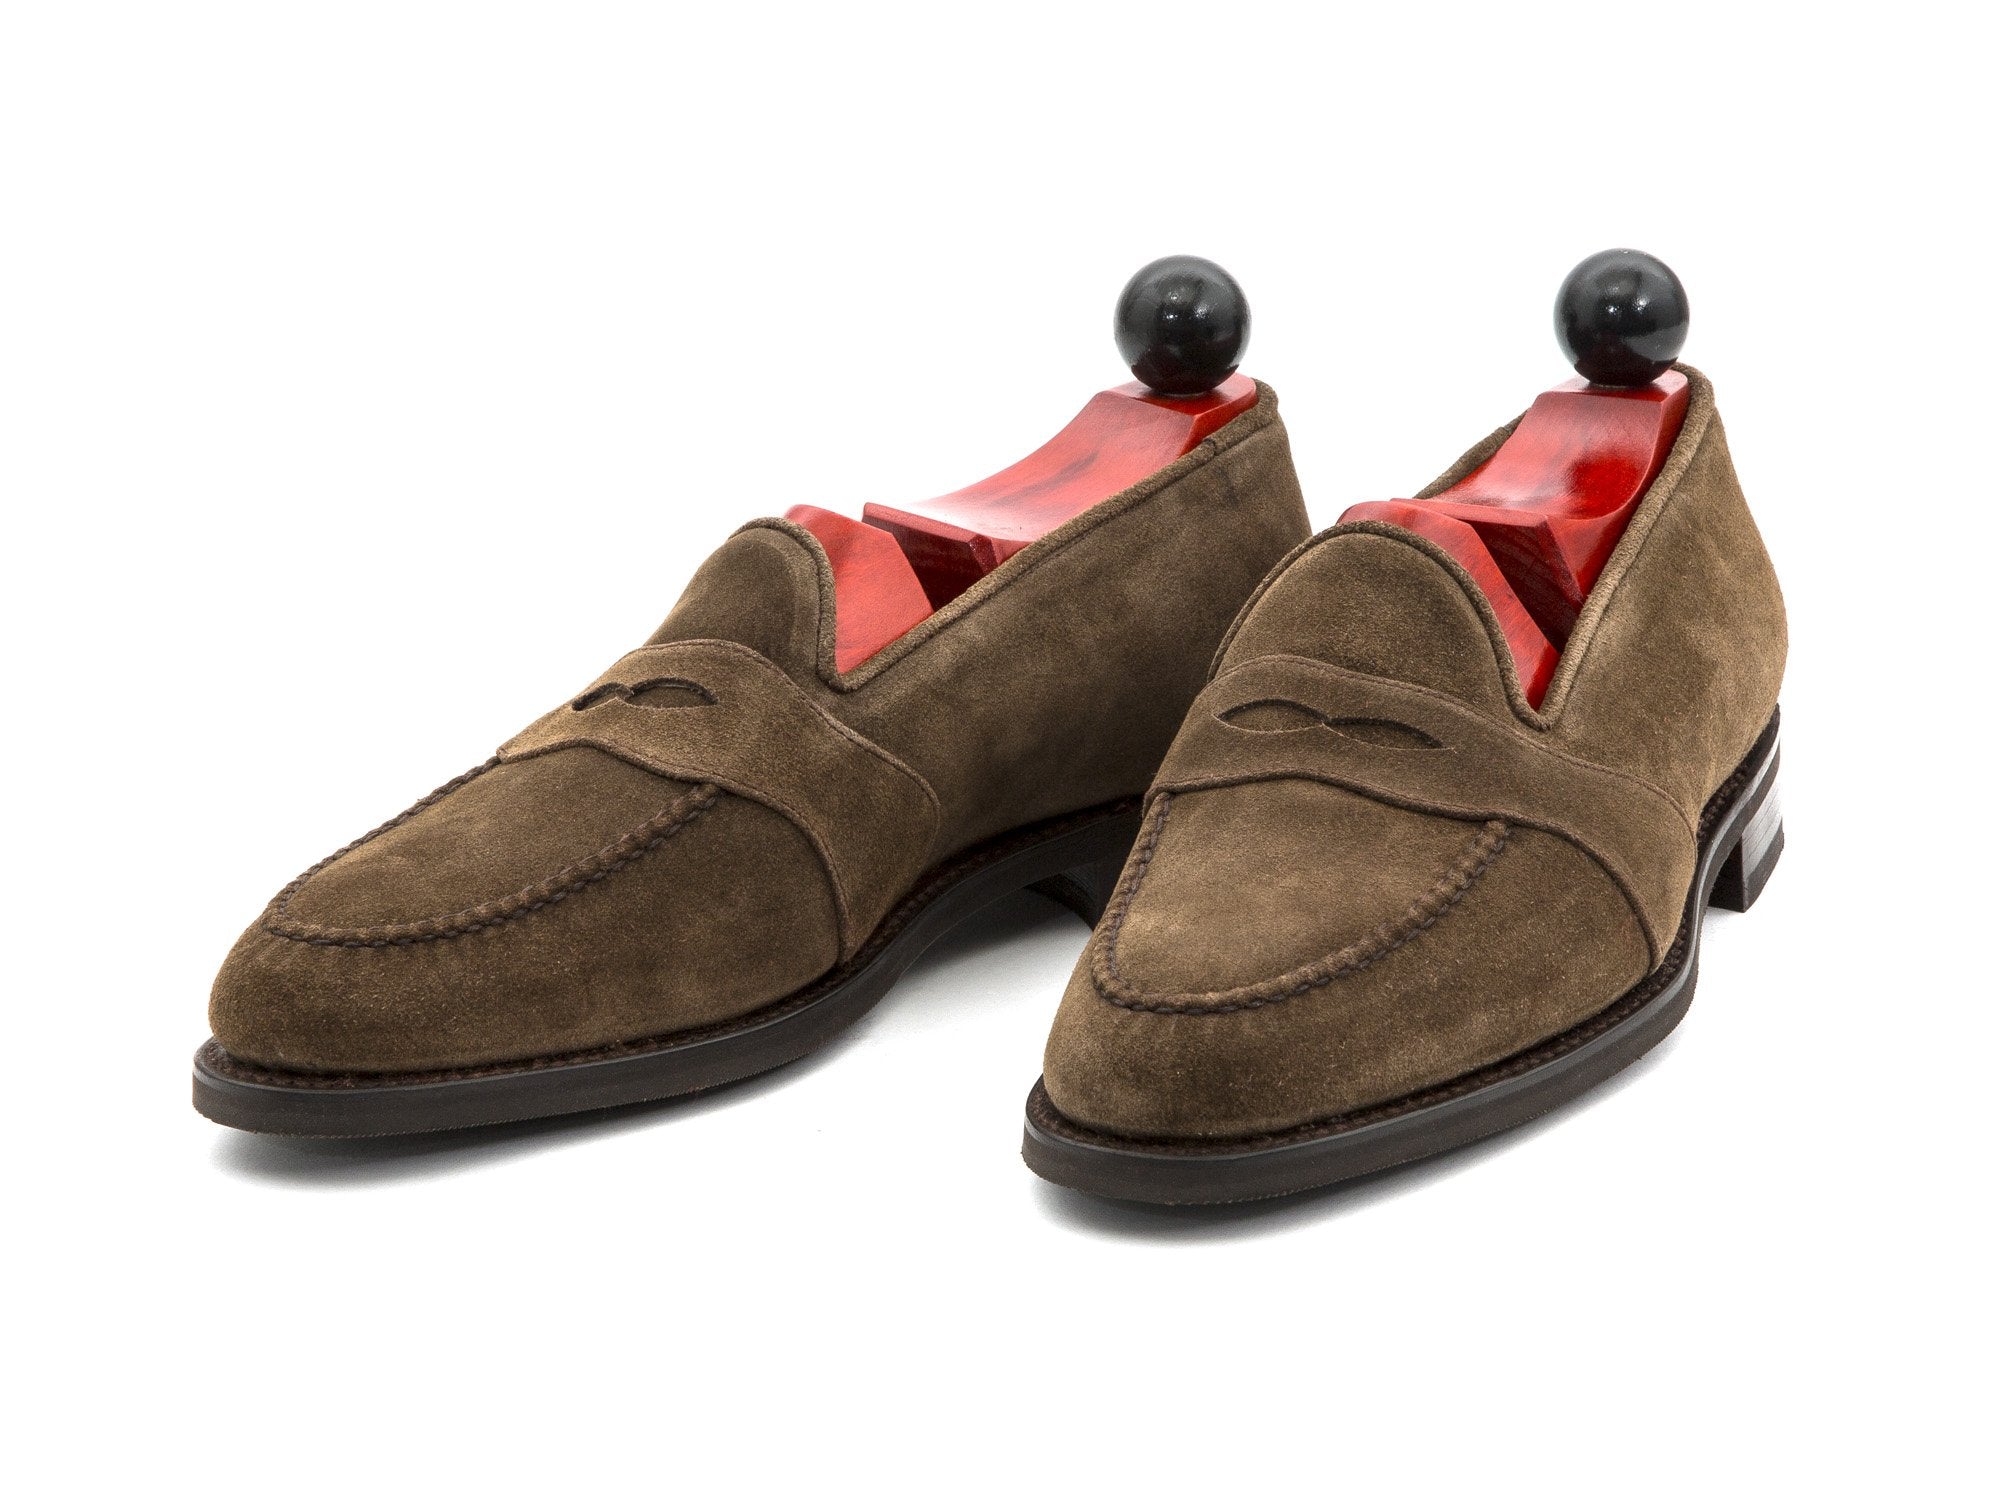 J.FitzPatrick Footwear - Madison - Taupe Suede - City Rubber Sole - TMG Last